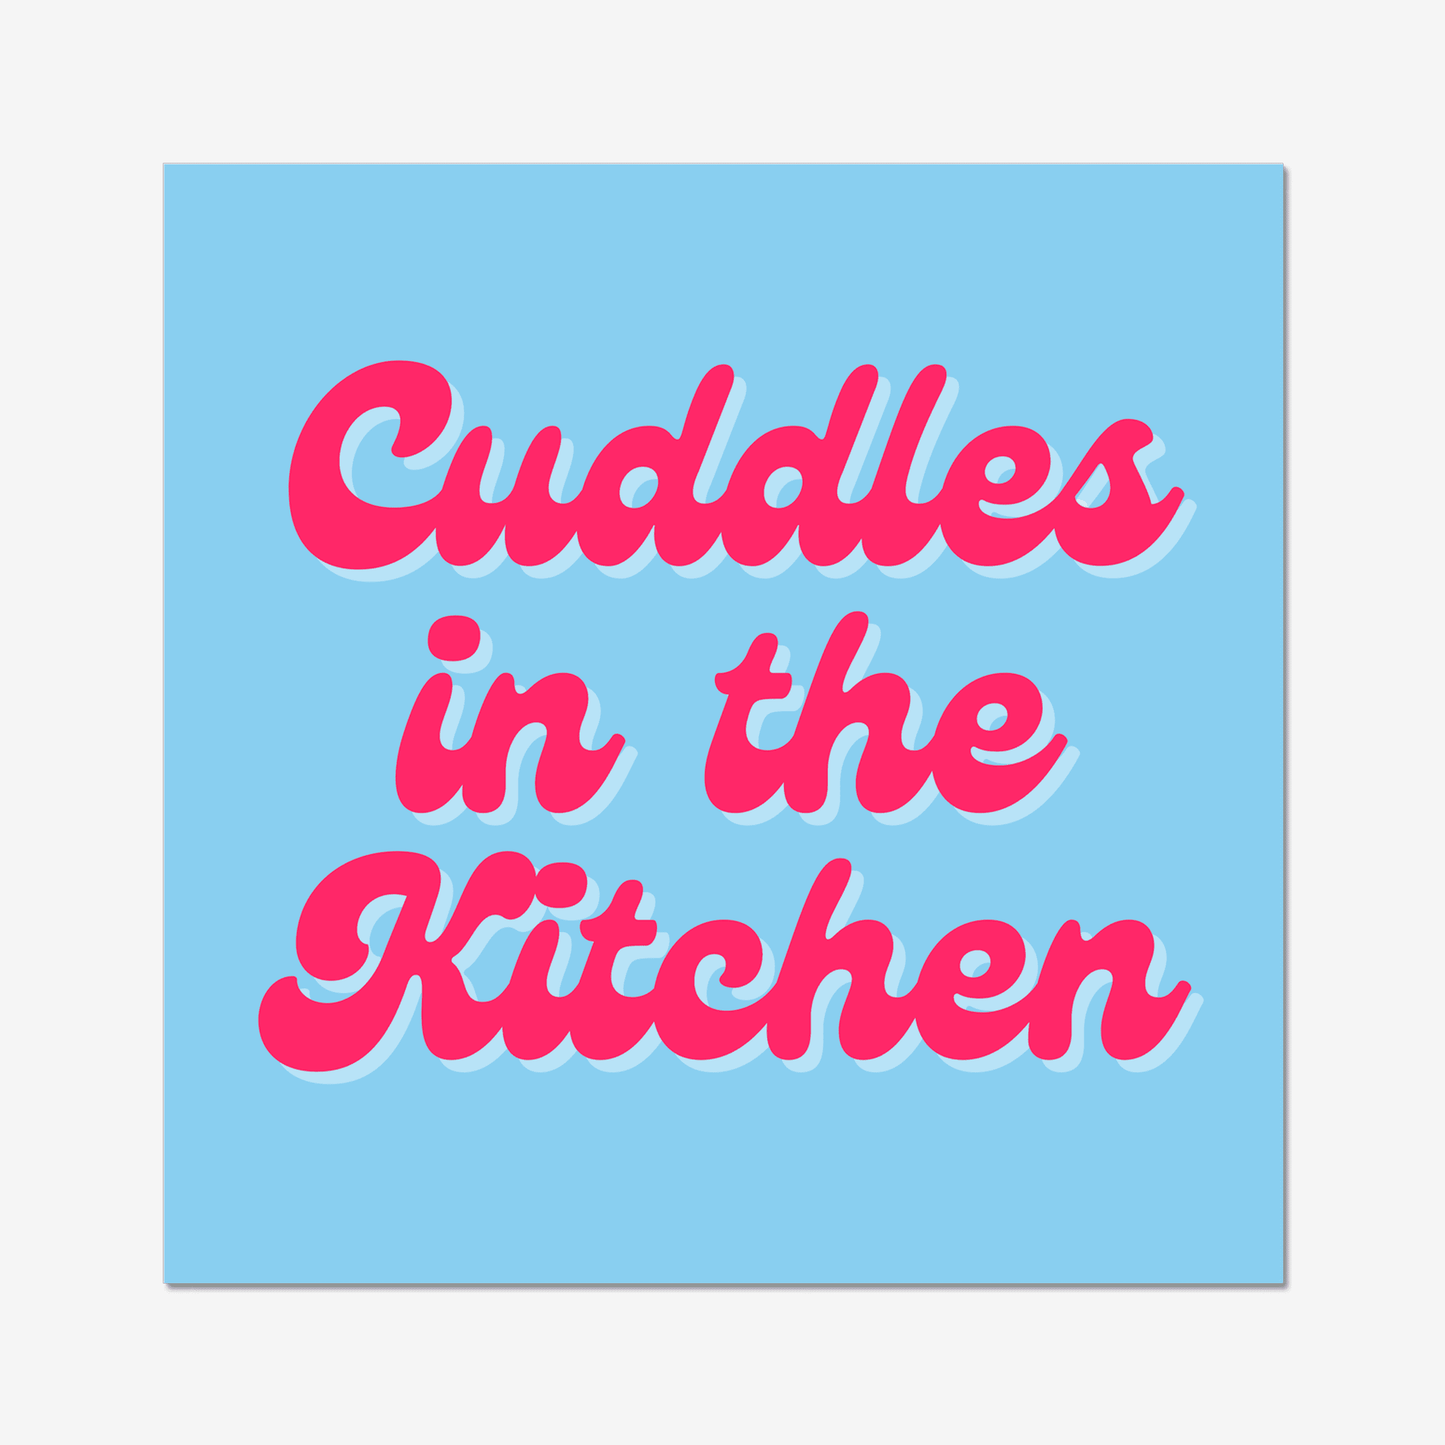 Cuddles in the kitchen art print. A bright and quirky print to make a fun statement in your home. A light blue background with a retro pink font. We love this Arctic Monkeys, Mardy Bum inspired print.